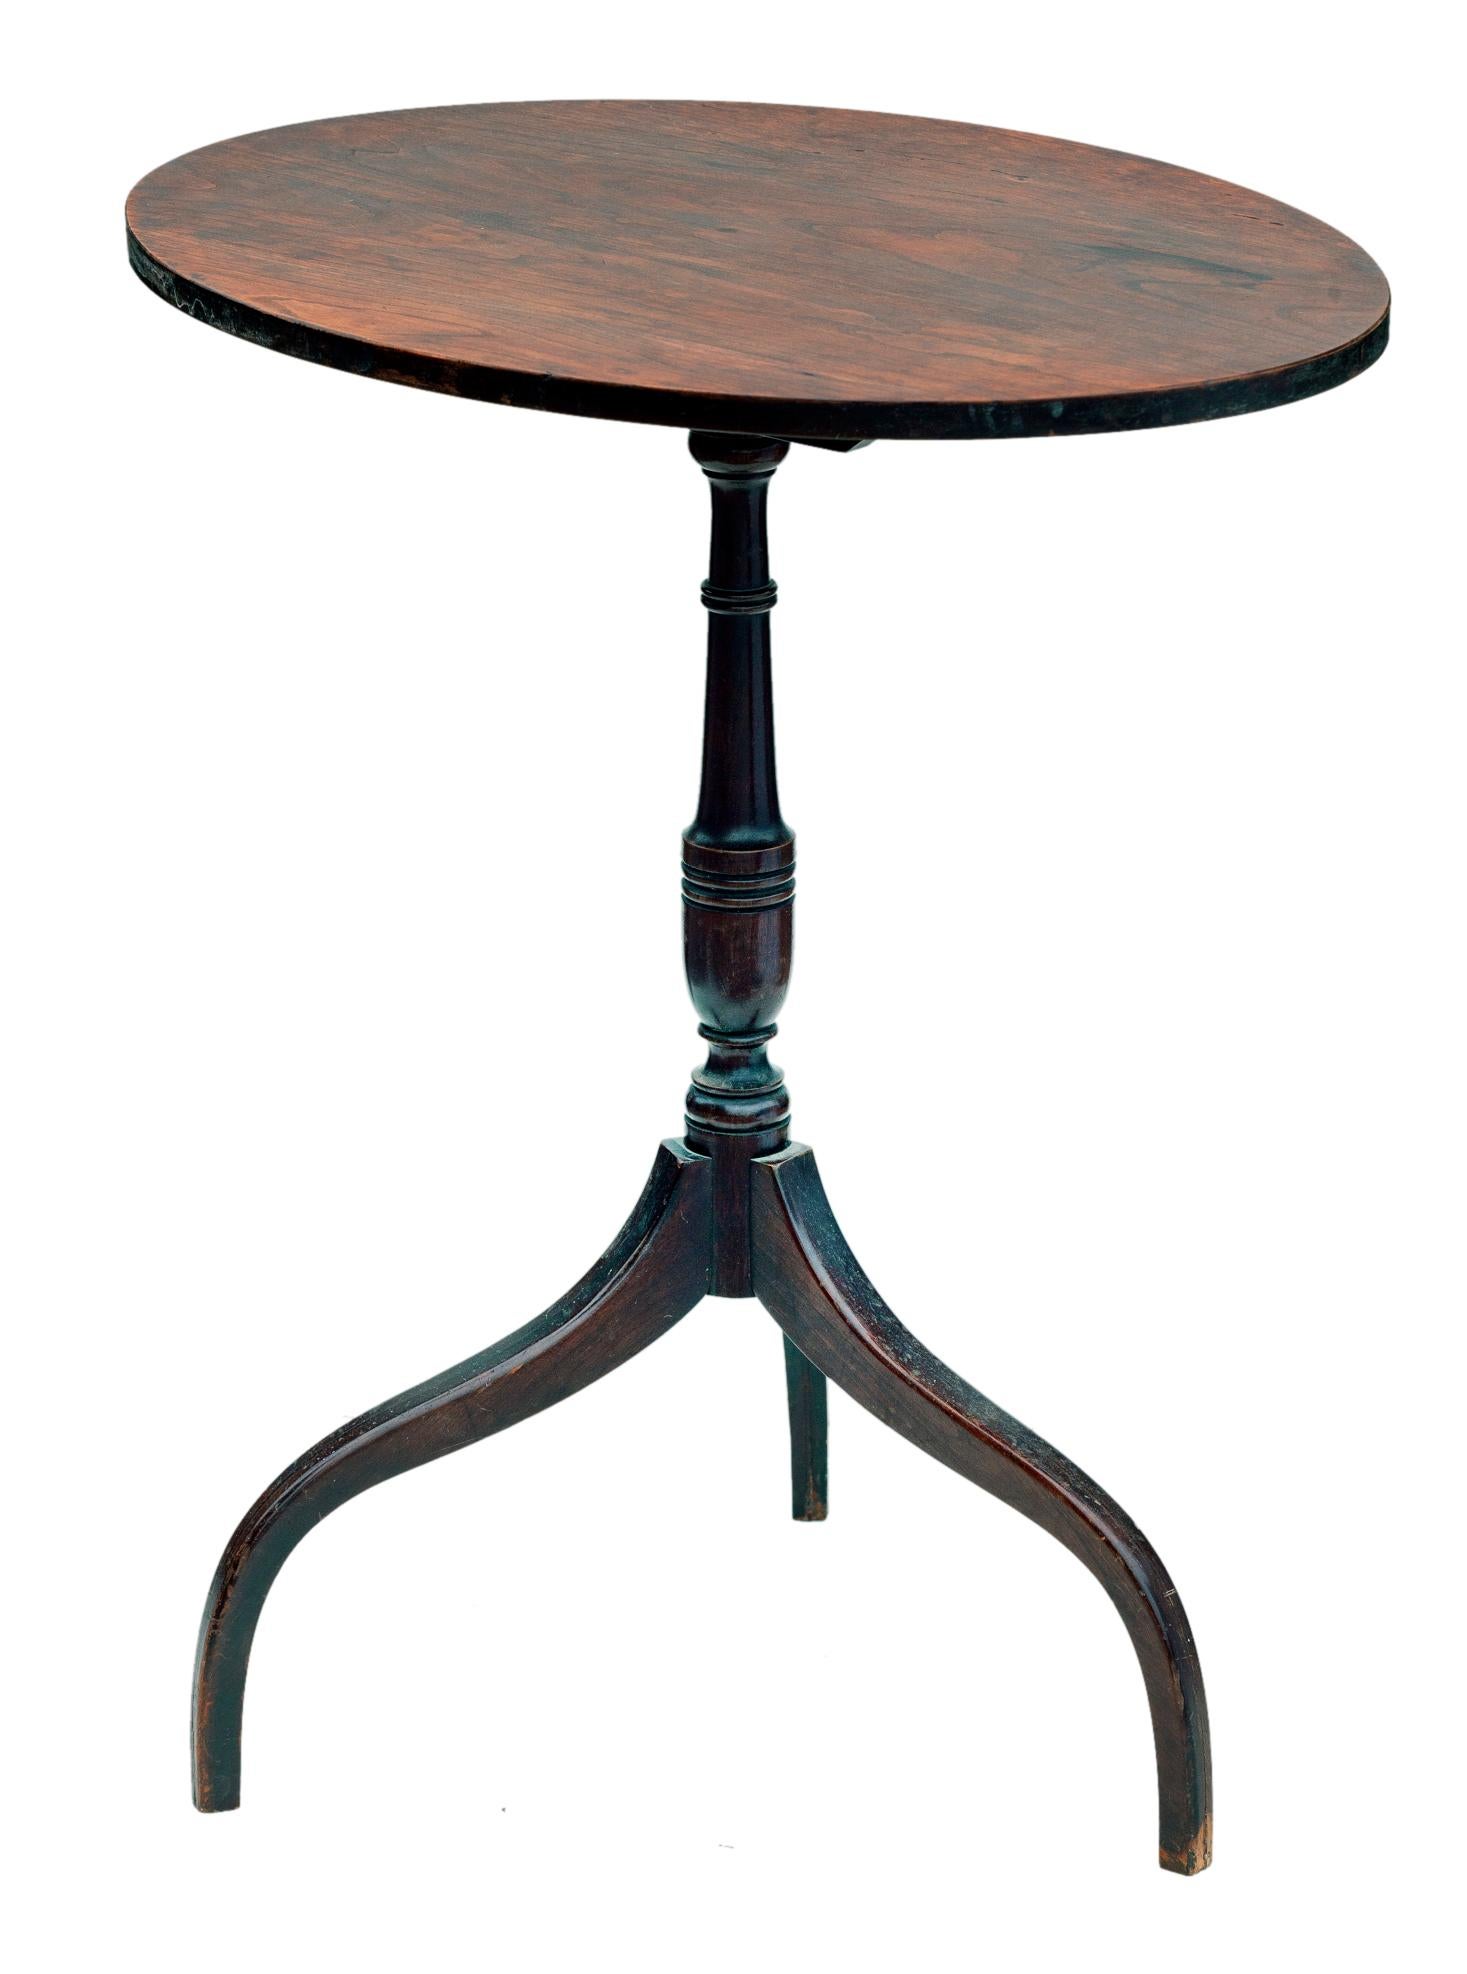 Hardwood Antique Cherry Oval Lilt Top Table For Sale